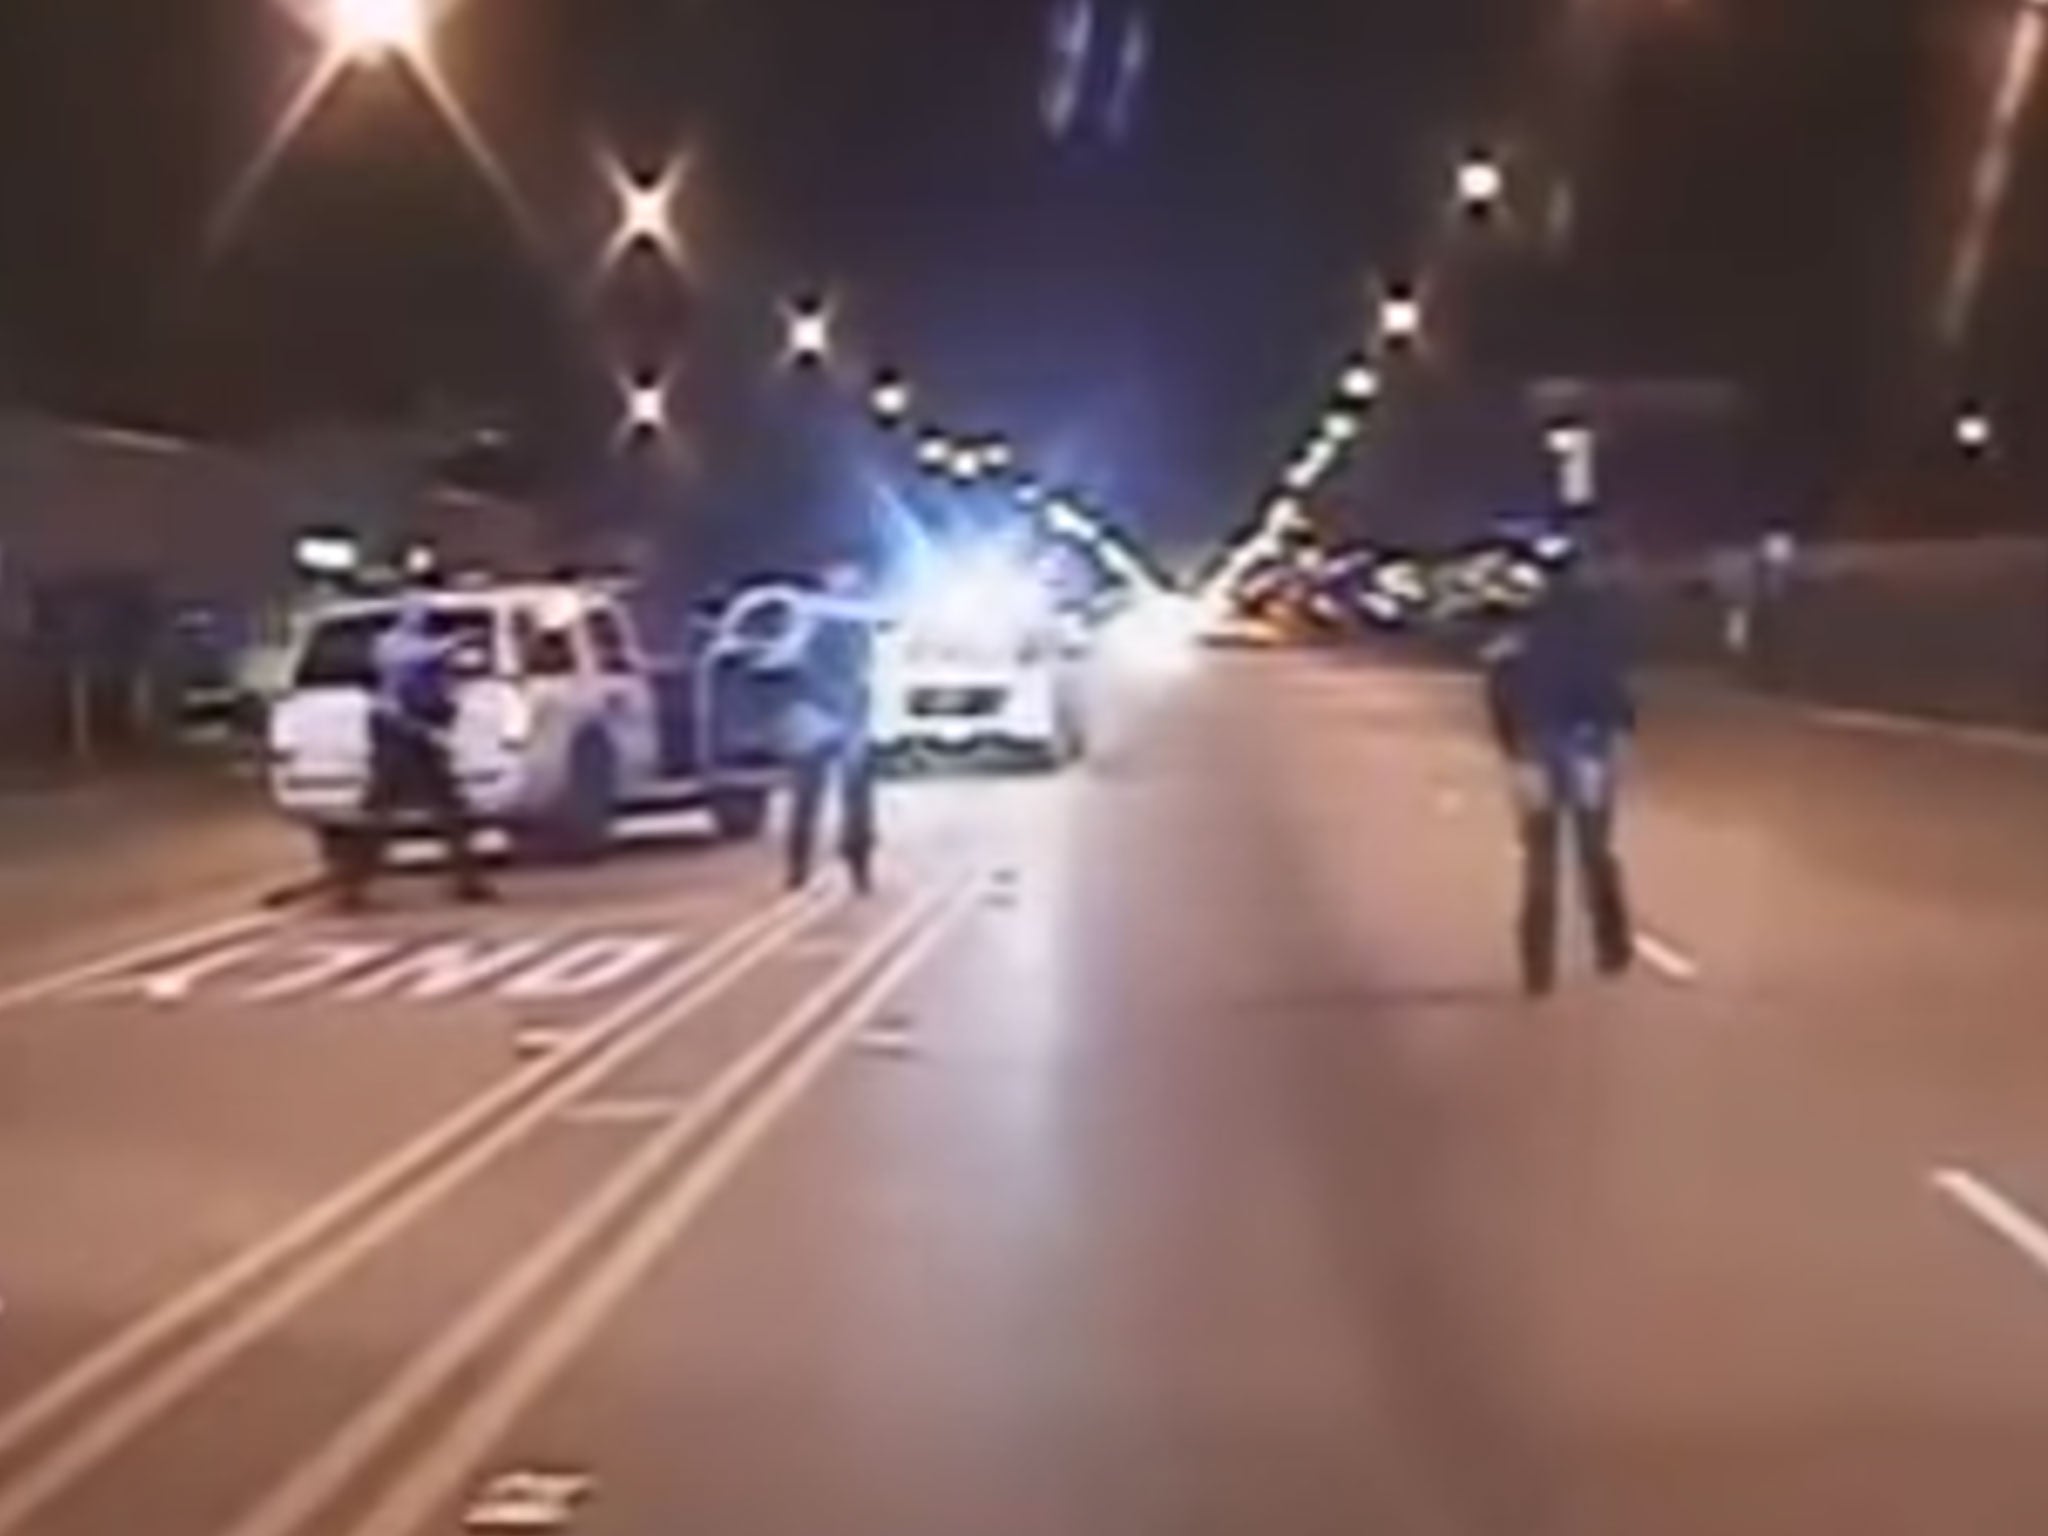 The 17-year-old was shot 16 times in 13 seconds as he walked away from officers